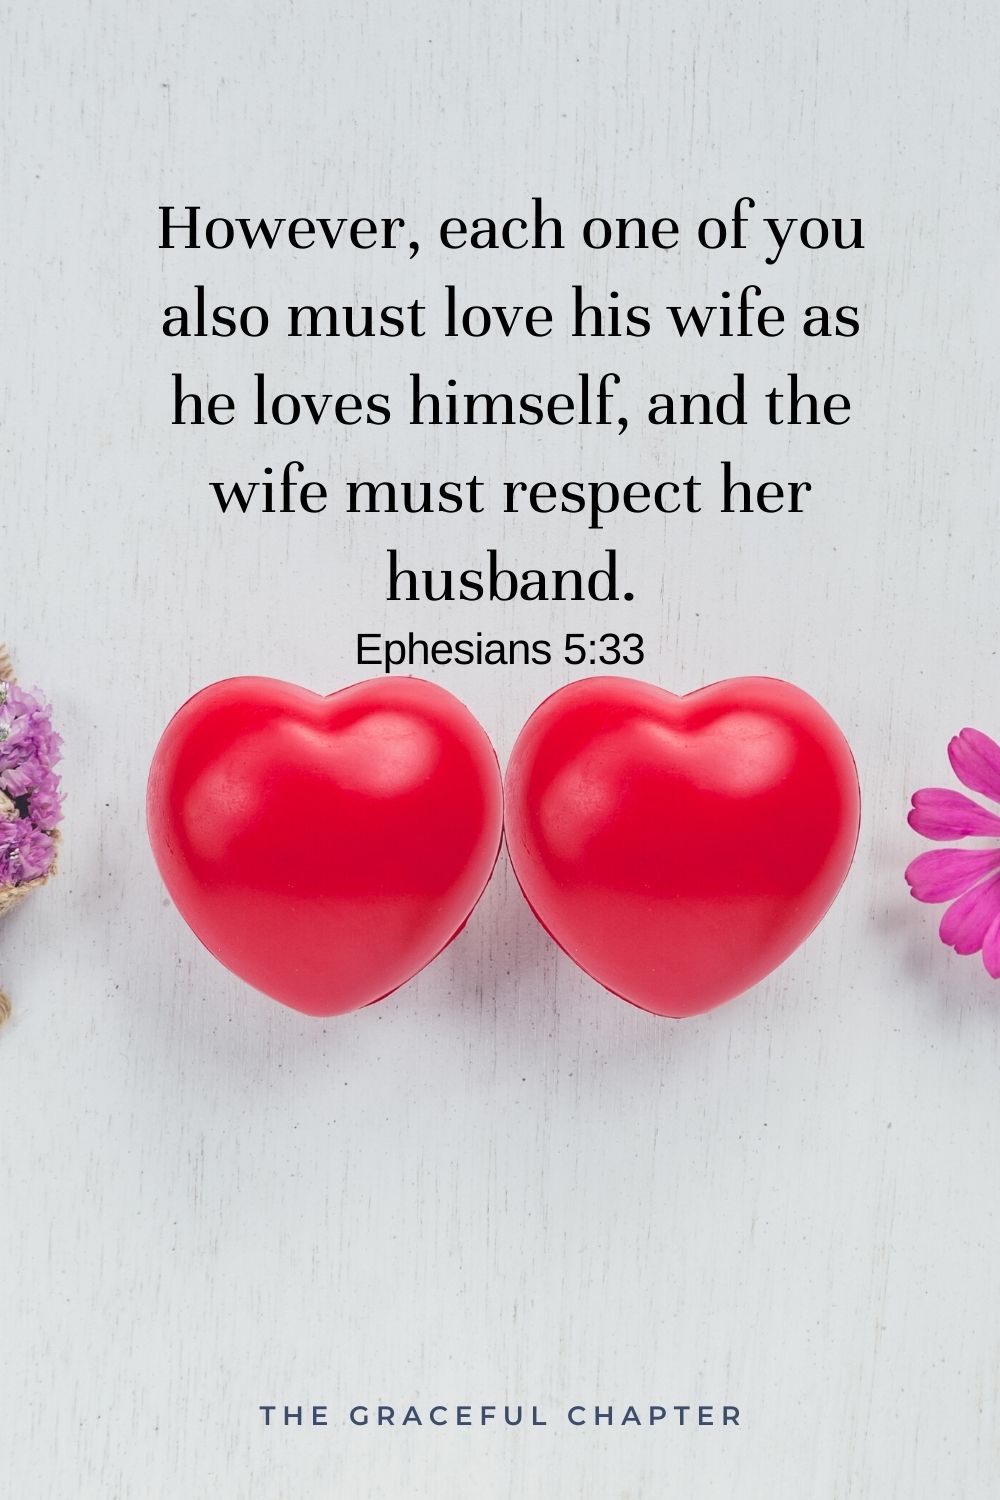 However, each one of you also must love his wife as he loves himself, and the wife must respect her husband. Ephesians 5:33